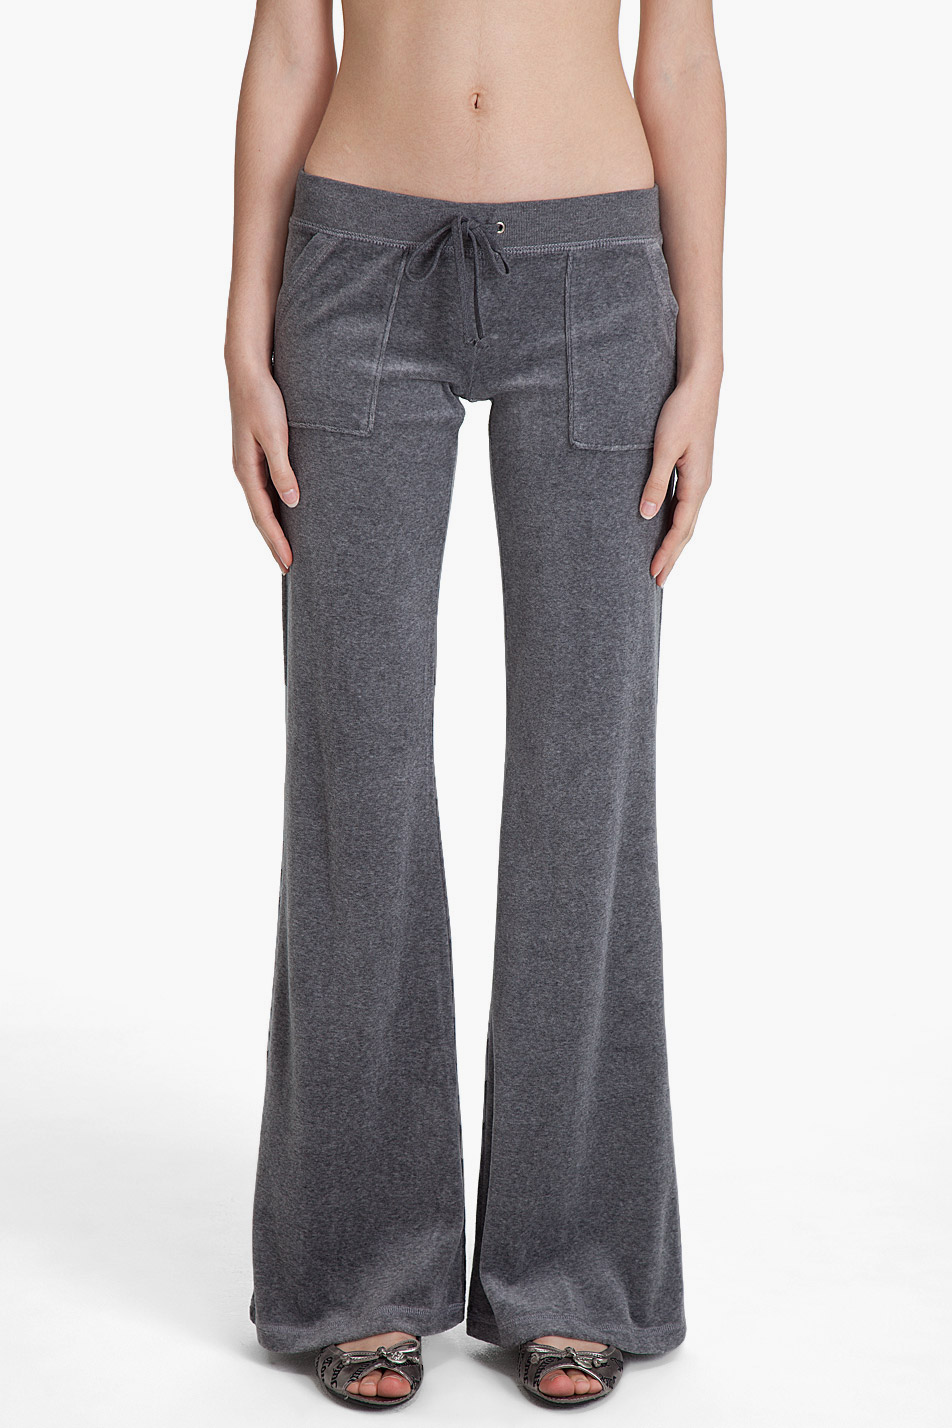 Juicy Couture Flare Velour Pants in Charcoal (Gray) - Lyst